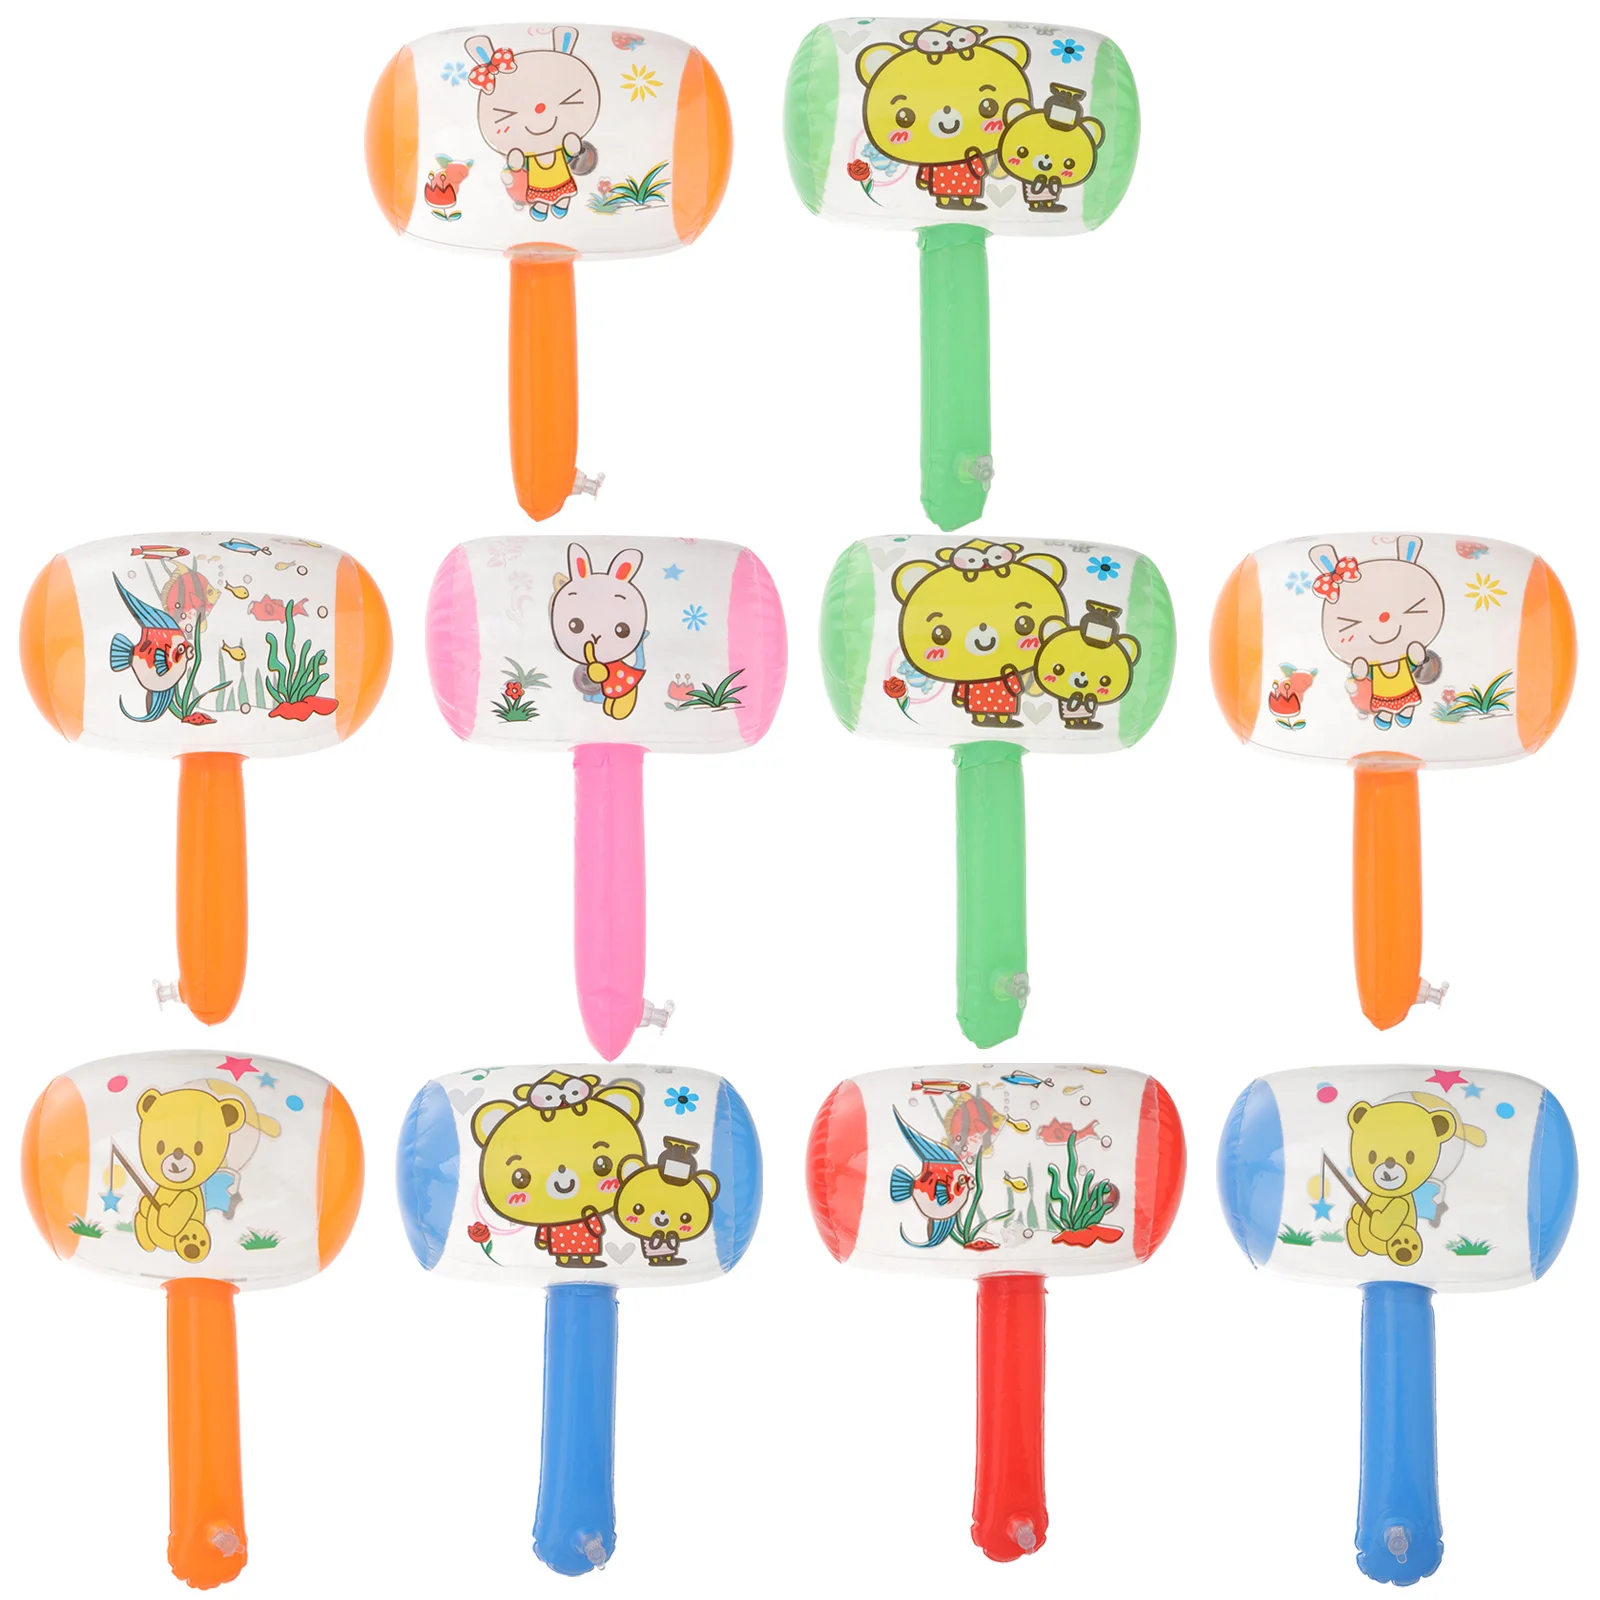 Toys Baby Hand Grip Toy Plastic Hammers Toys Kids Party Decorations  Construction Party Supplies Birthday Party Favors 130 220cm happy birthday cartoon car excavator disposable tablecover kids party favors construction tablecloth party decorations